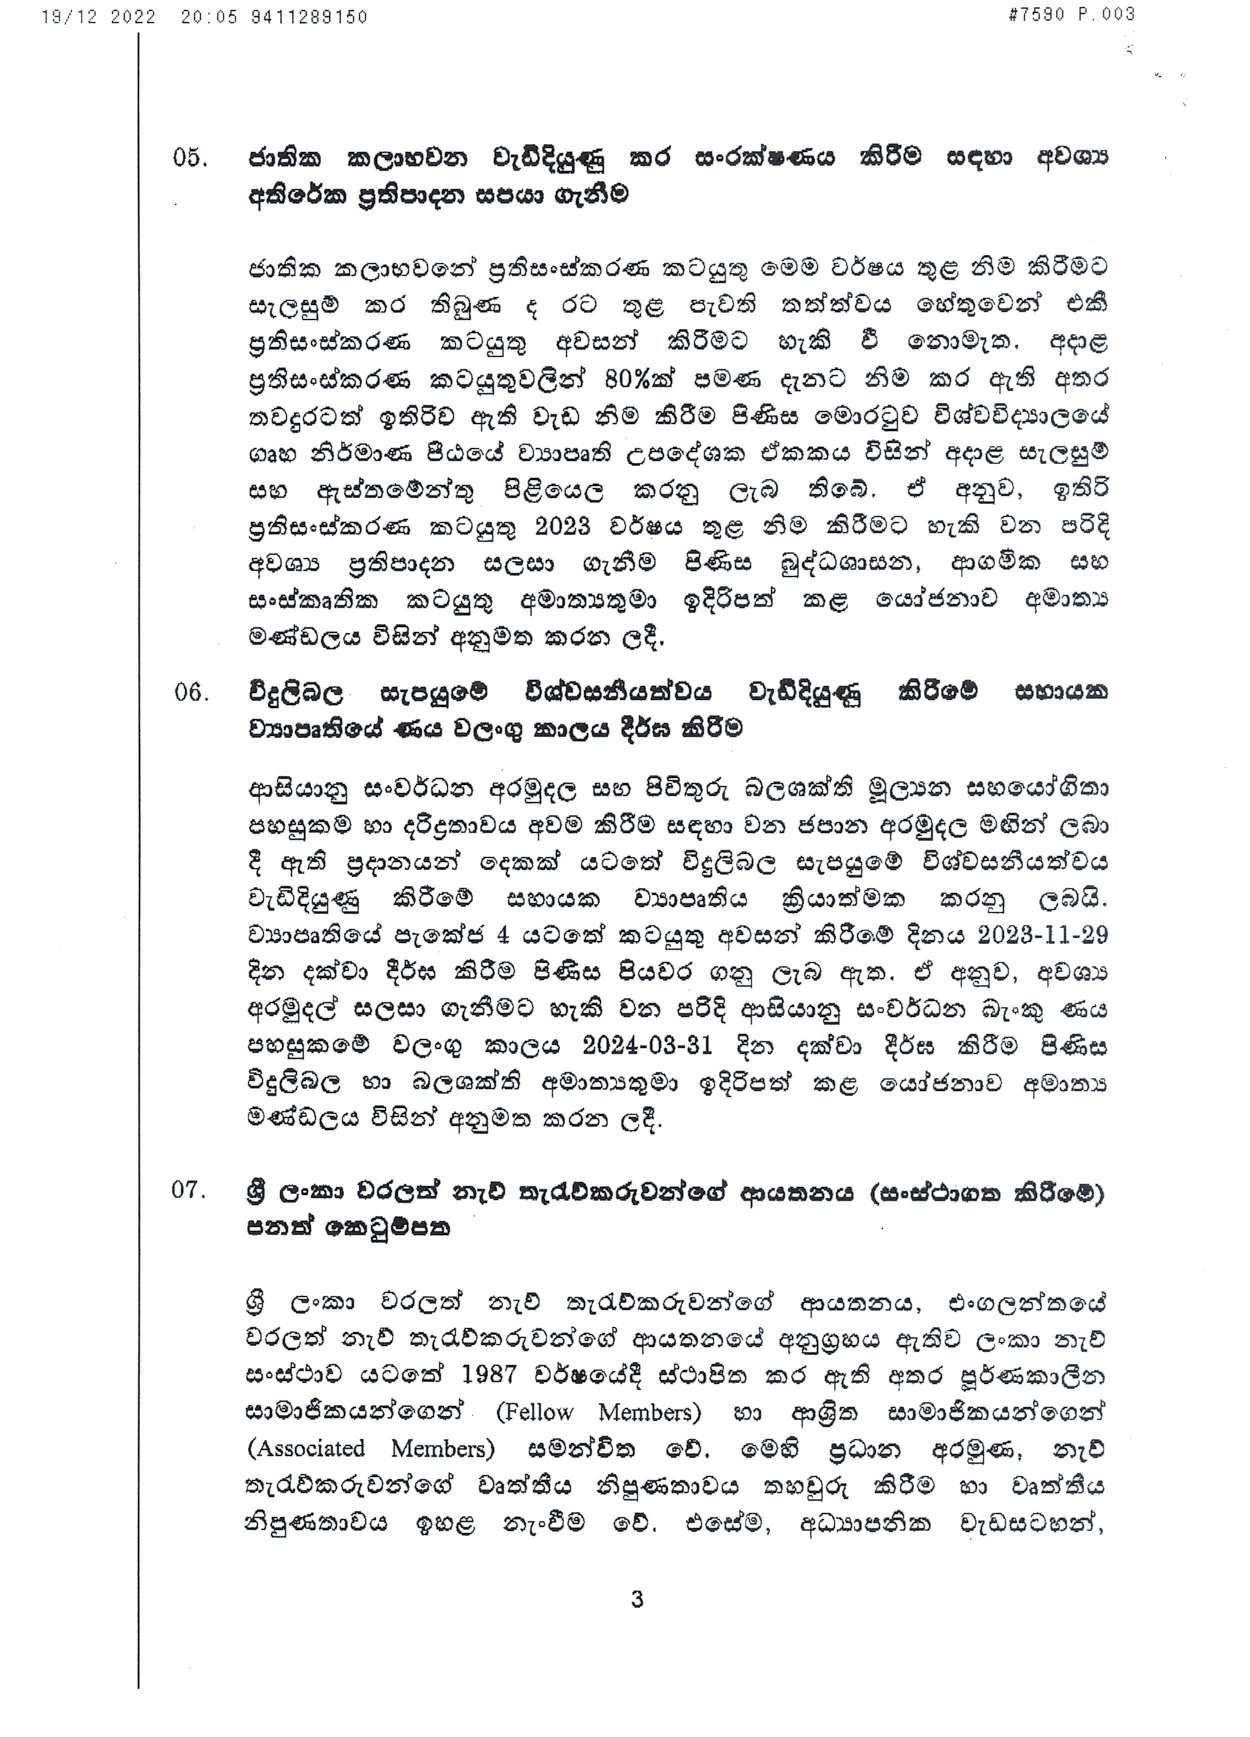 Cabinet Decisions on 19.12.2022 S page 003